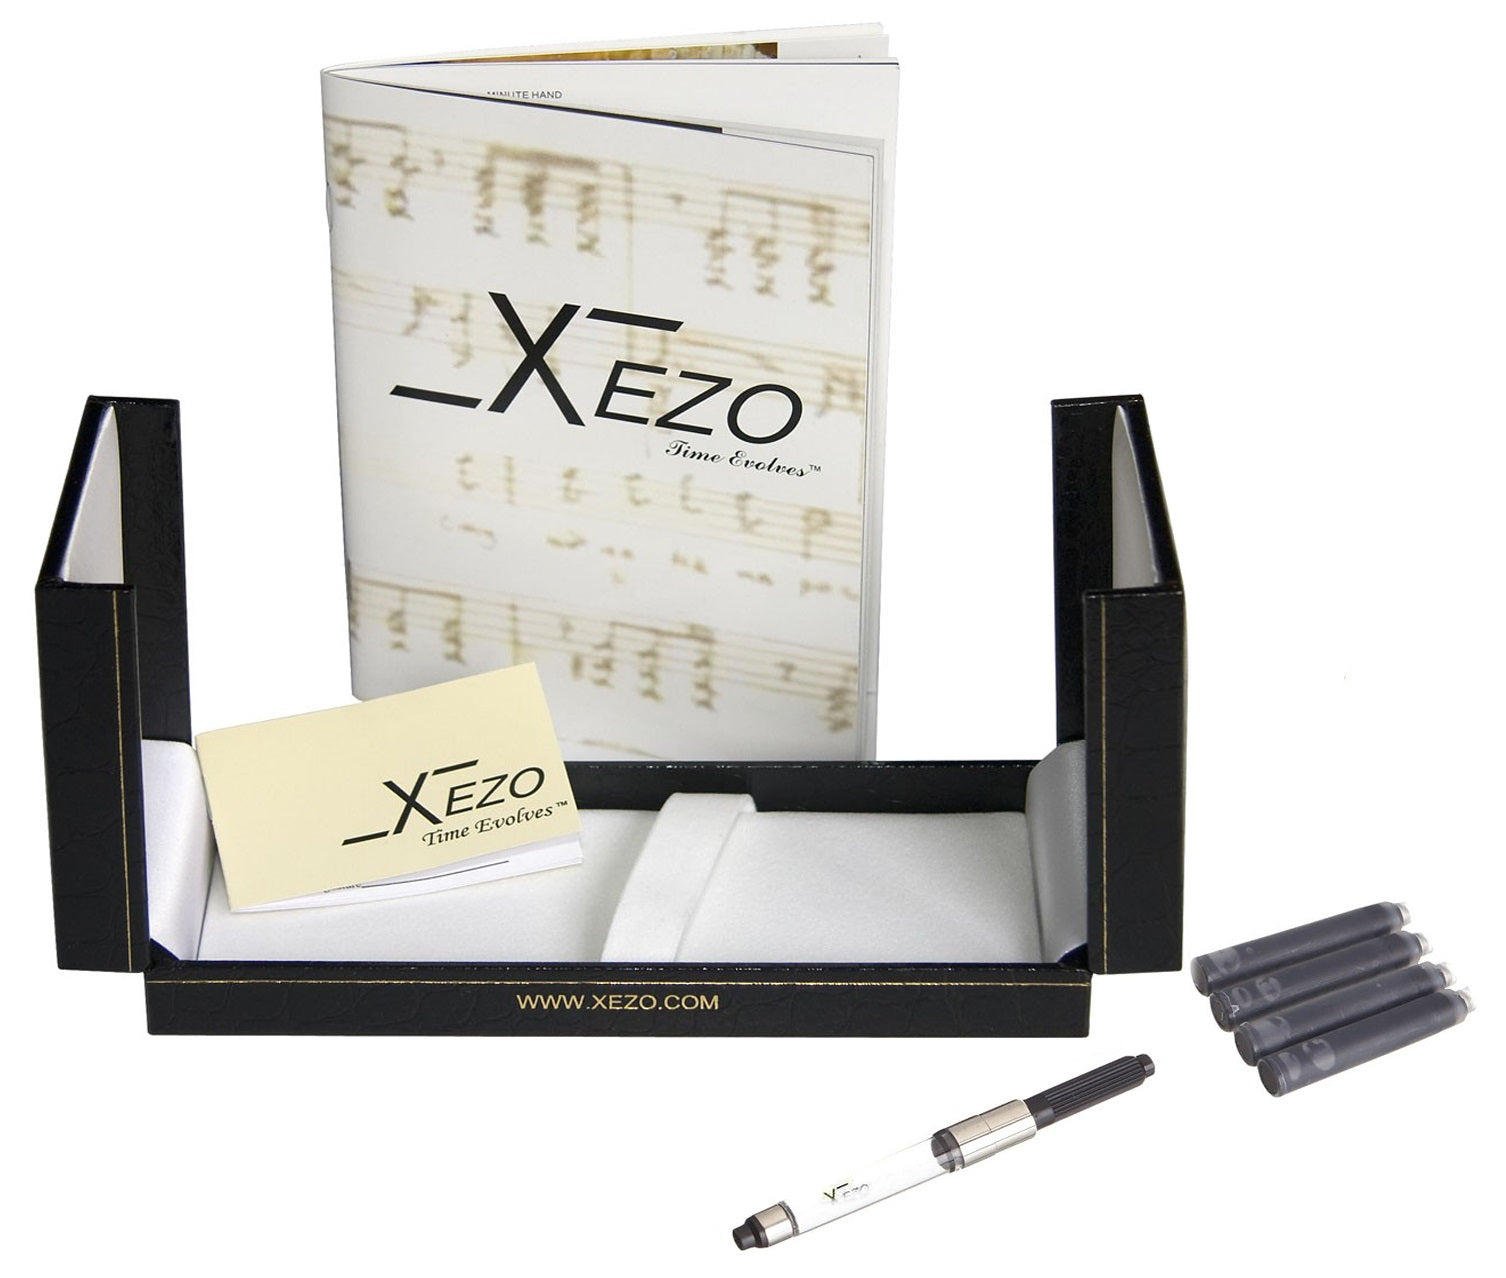 Xezo - Black gift box, certificate, manual, chrome-plated ink converter, and four ink cartridges of the Visionary Aspen/Red FM fountain pen